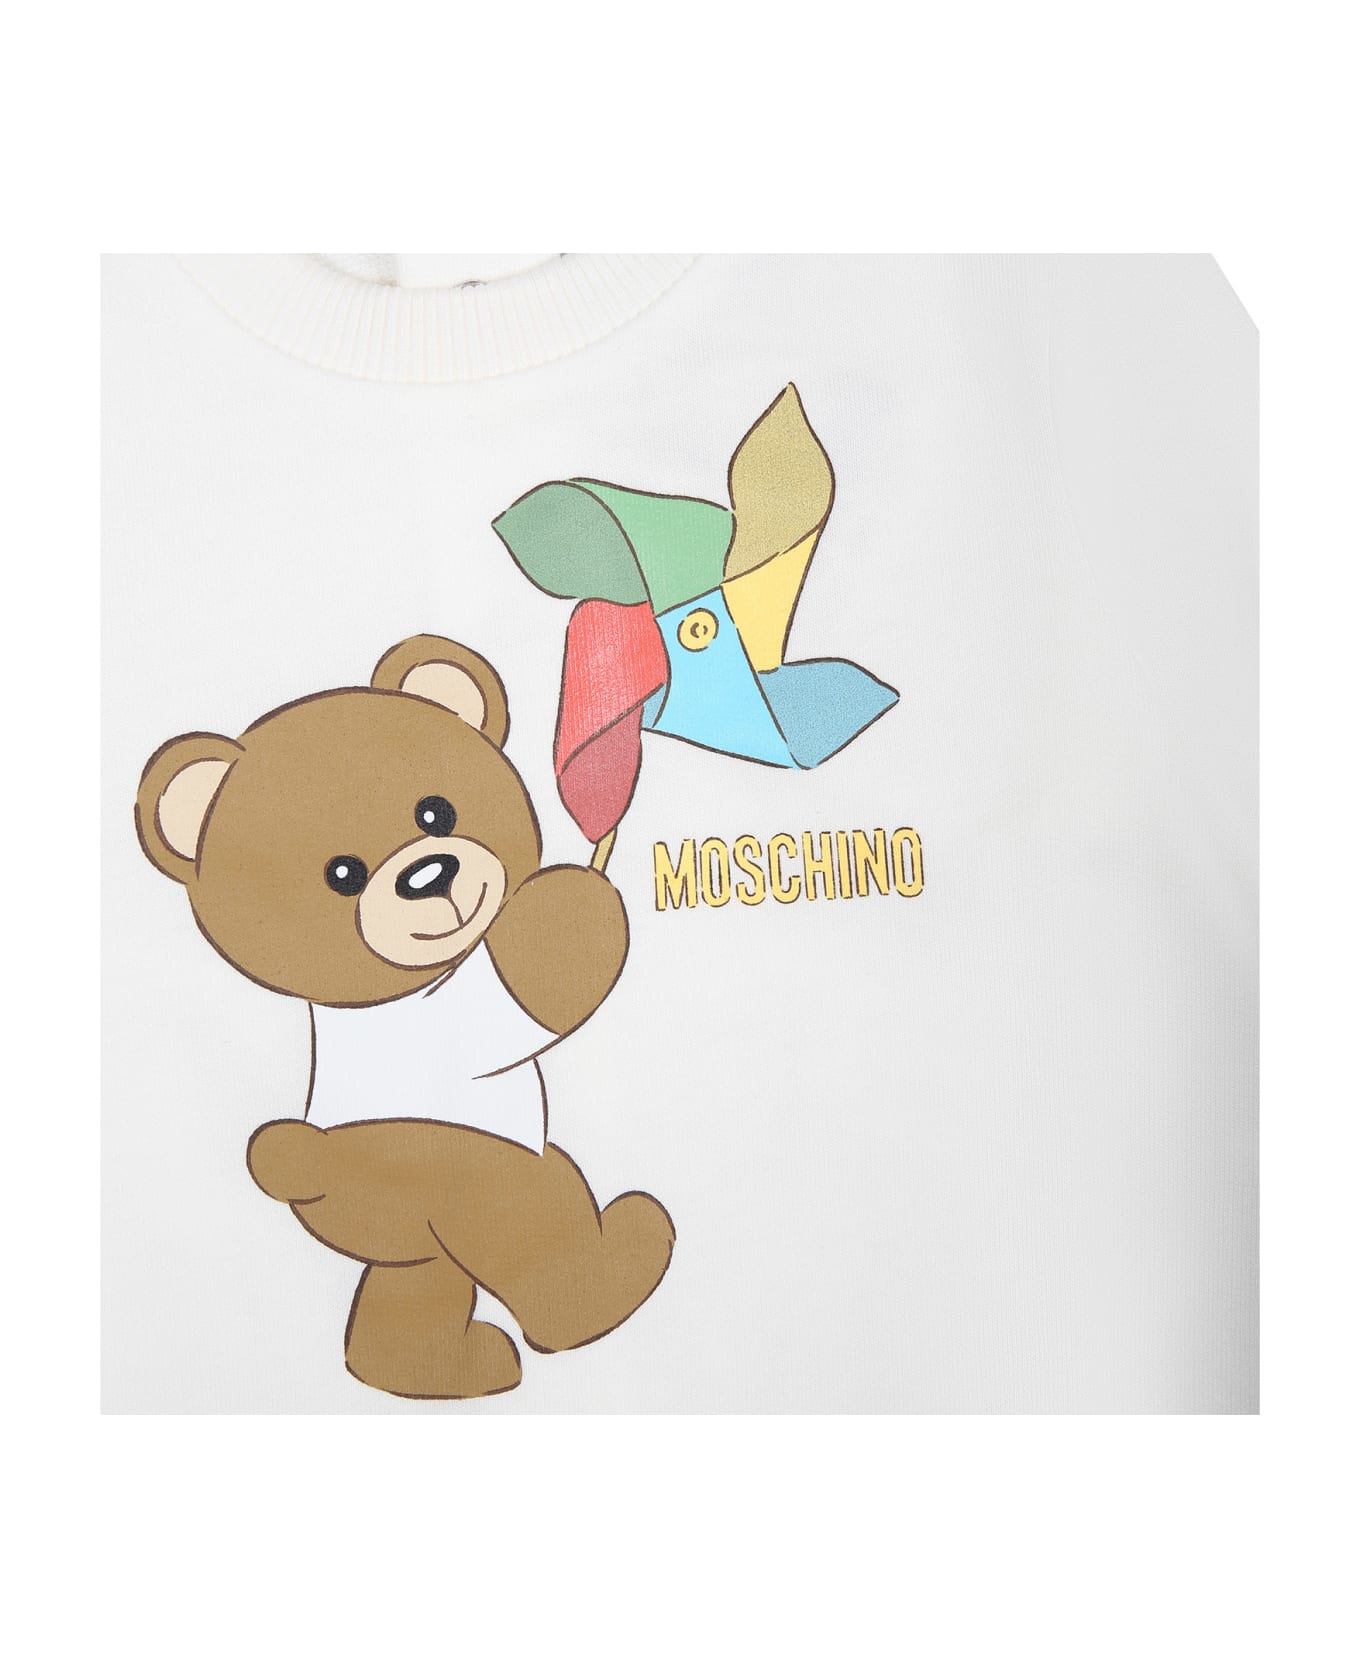 Moschino Ivory Bodysuit For Babies With Teddy Bear And Multicolor Pinwheel - Ivory